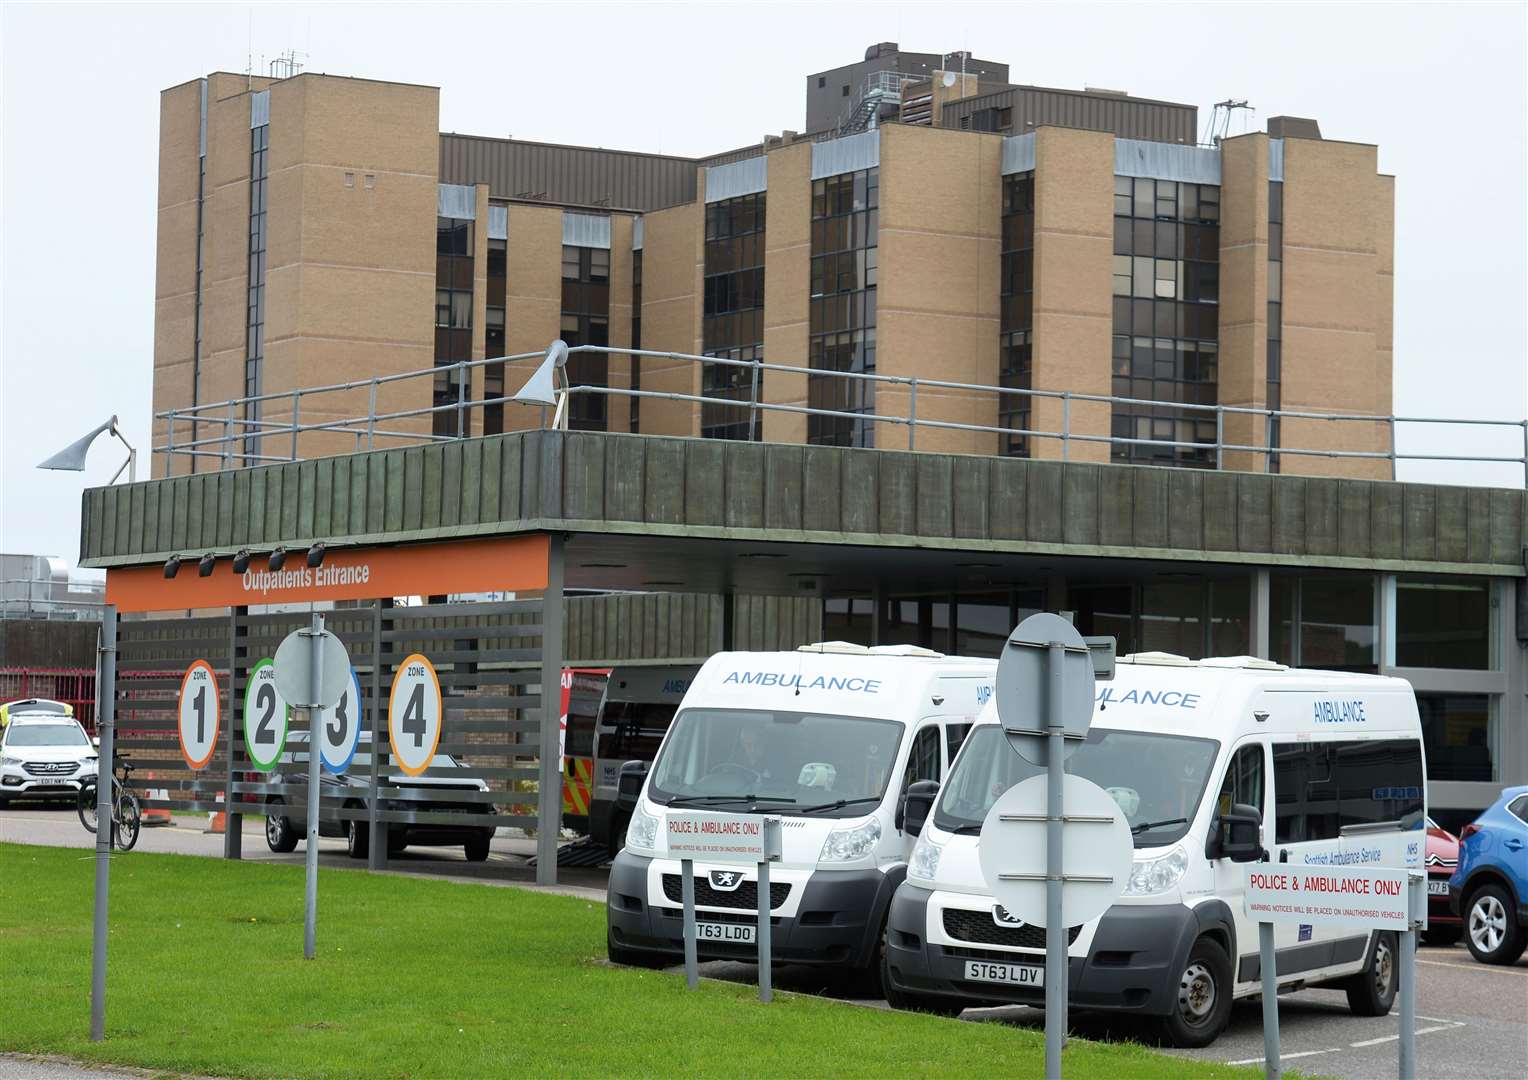 Upgrades at Raigmore Hospital in Inverness were also put on hold as part of the spending review.